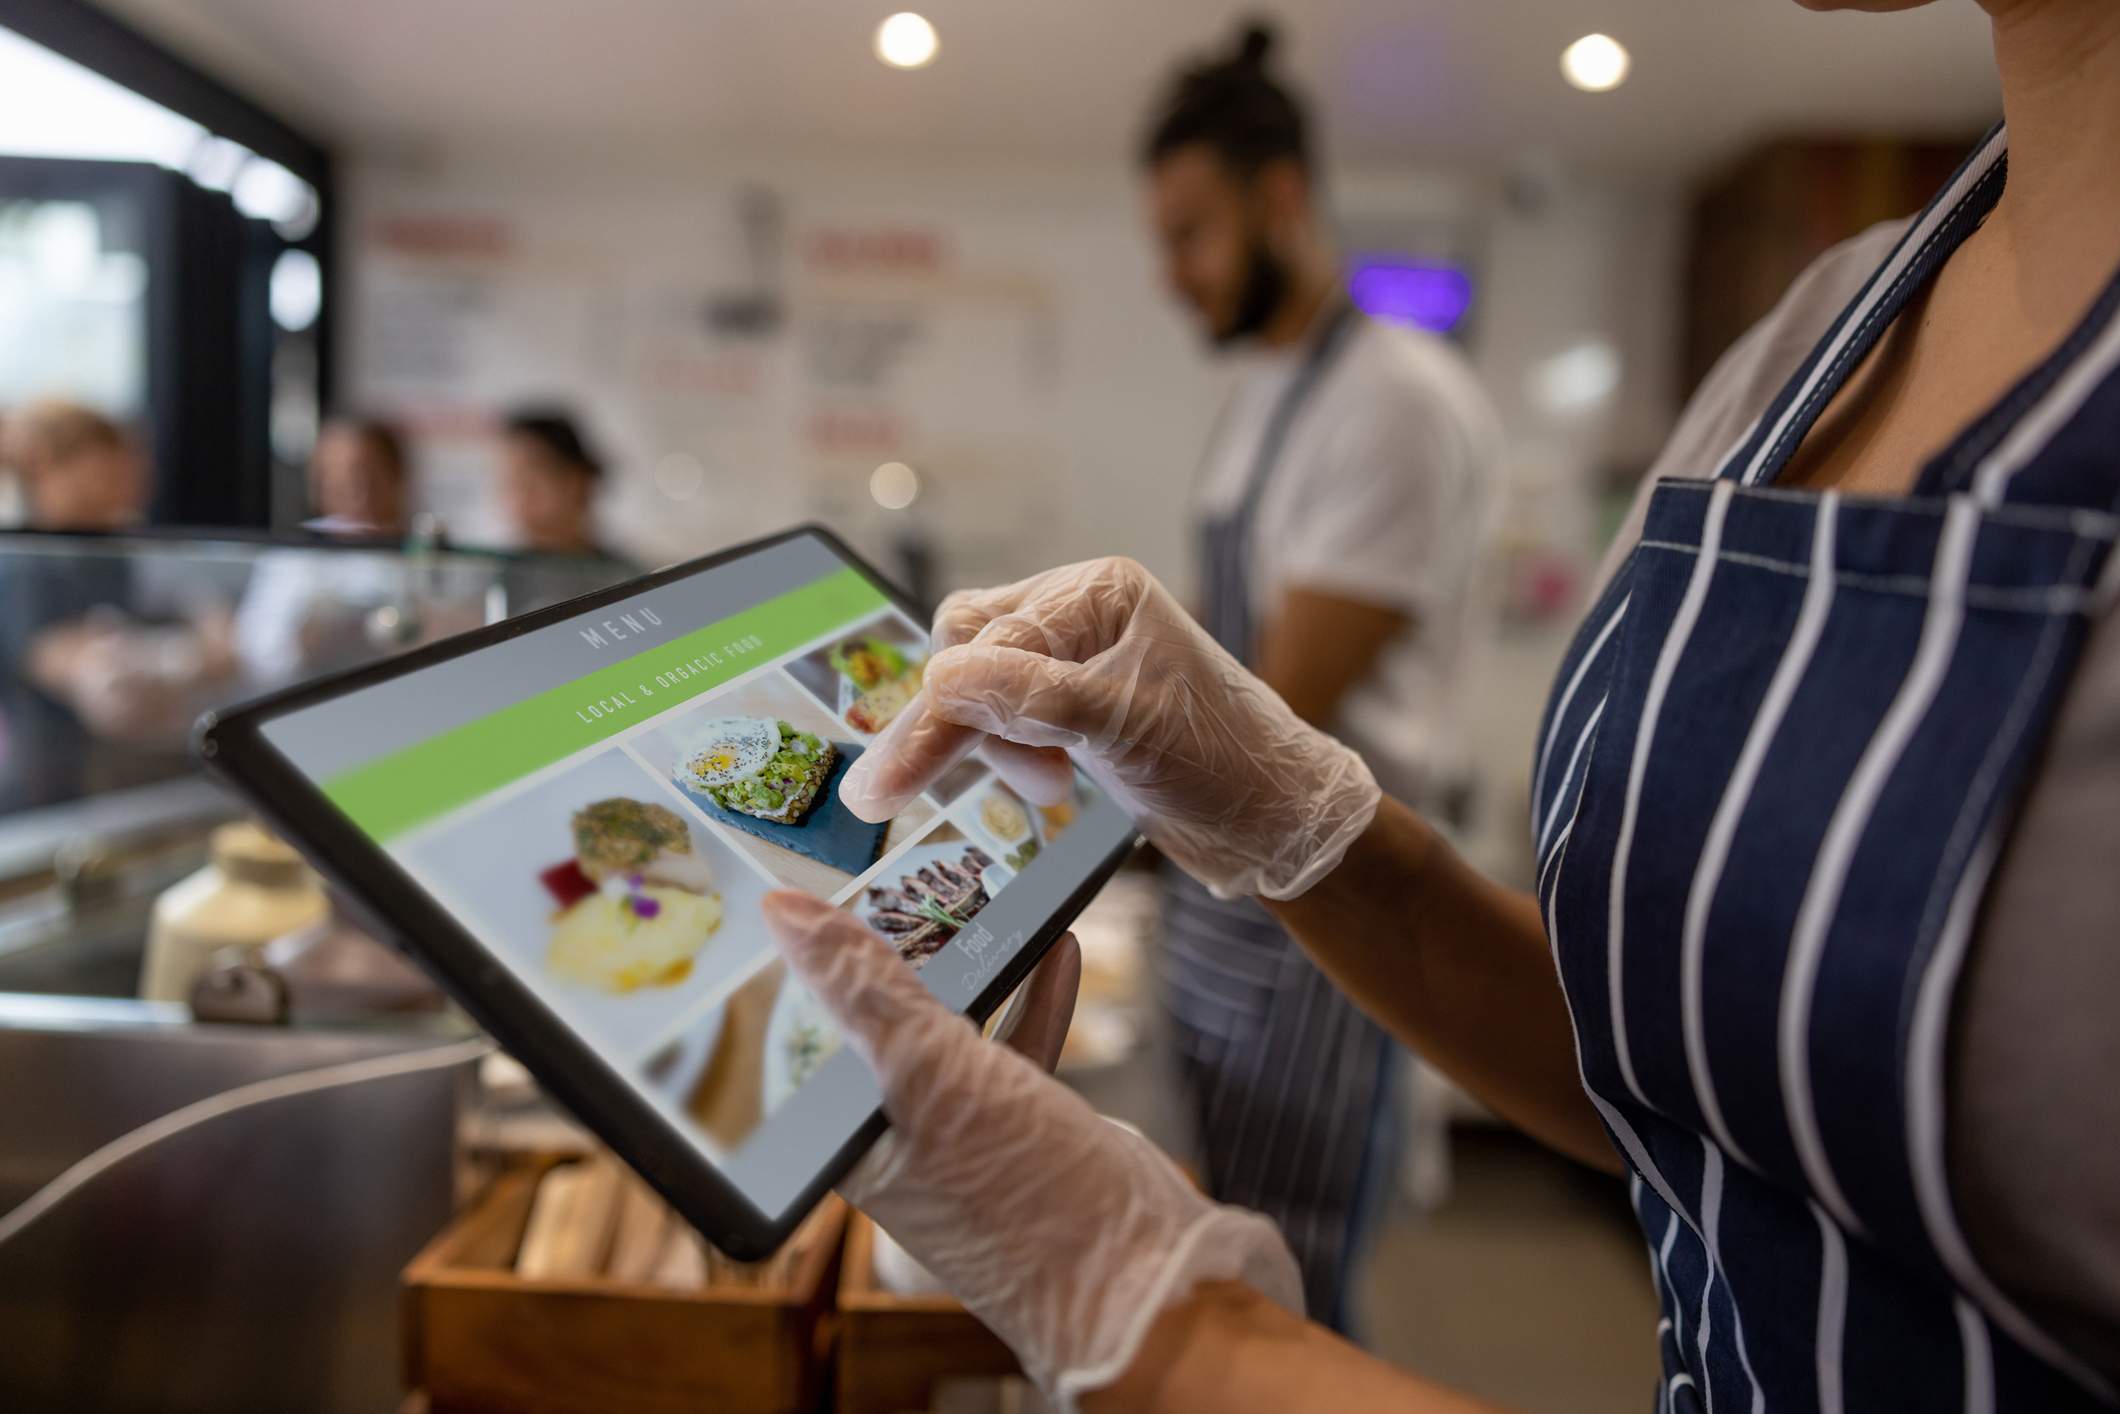 Image depicts a server wearing a blue and white striped apron and plastic gloves using a tablet. The tablet displays different menu options.